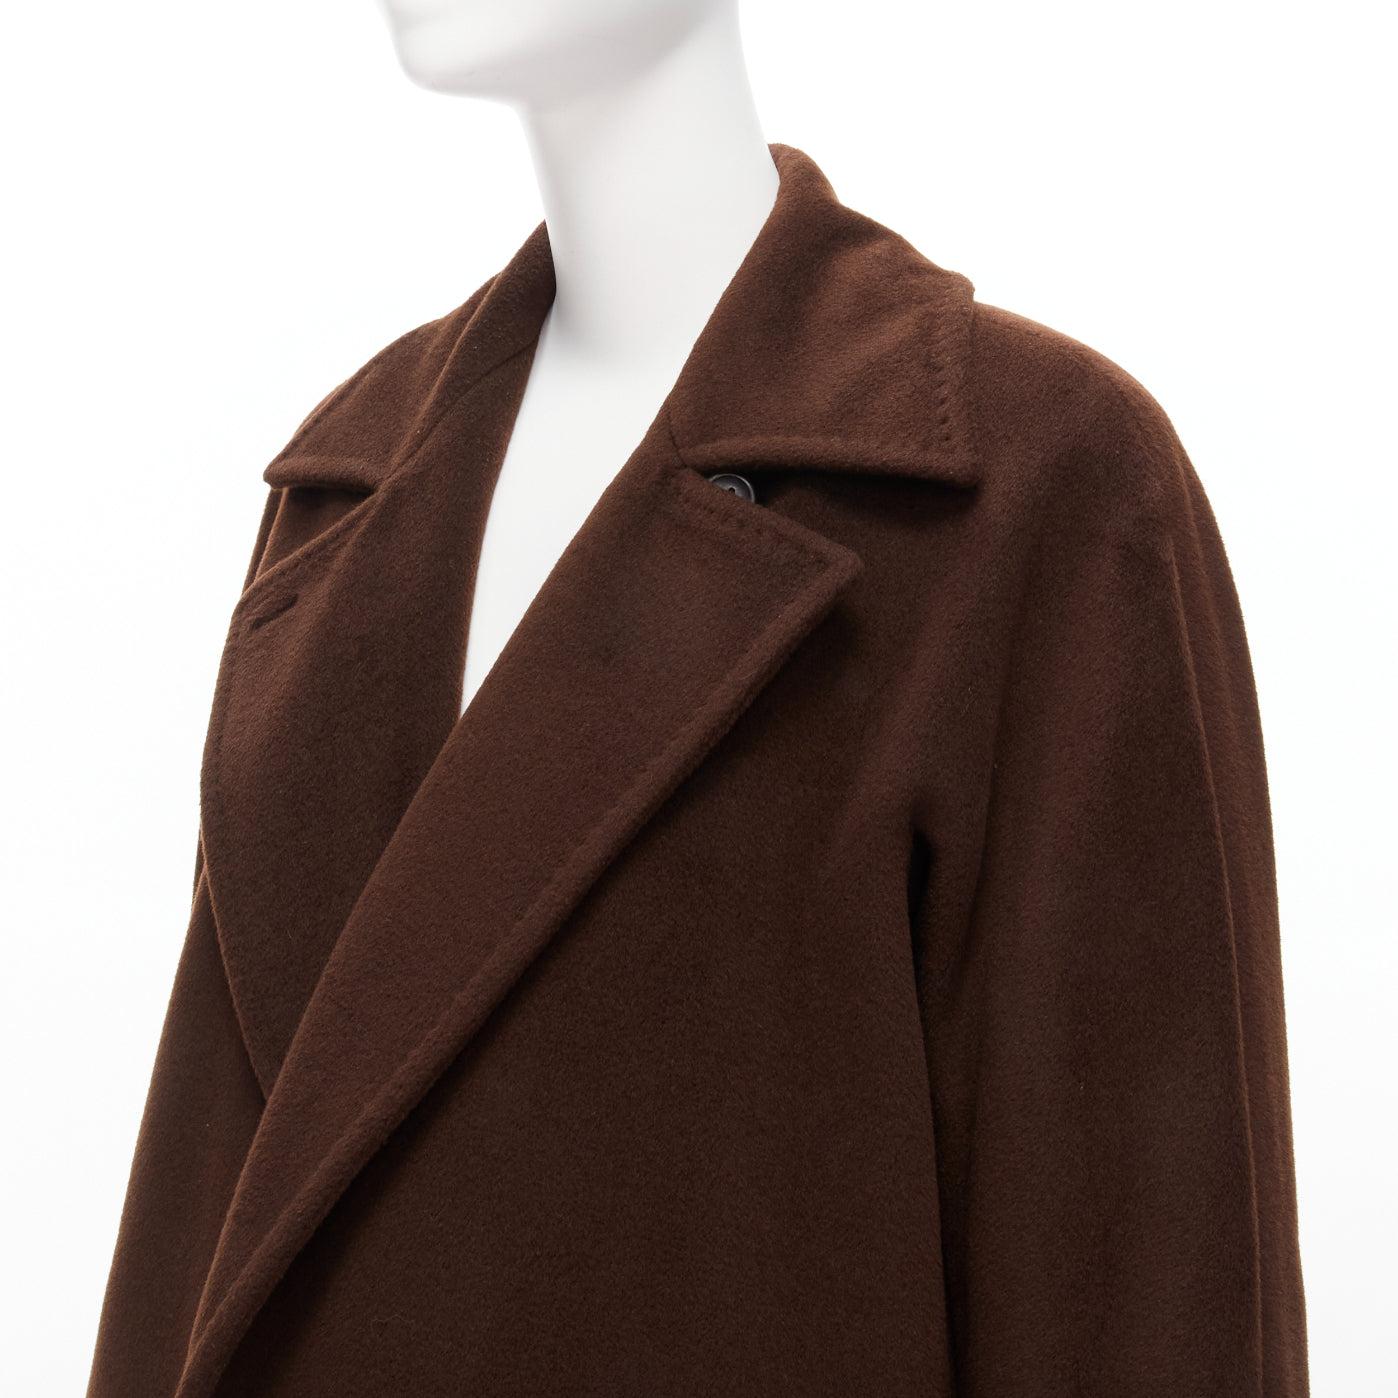 MAX MARA dark brown virgin wool cashmere wide lapel longline relaxed coat IT40 S
Reference: TGAS/D00559
Brand: Max Mara
Material: Virgin Wool, Cashmere
Color: Brown
Pattern: Solid
Lining: Brown Fabric
Made in: Italy

CONDITION:
Condition: Excellent,